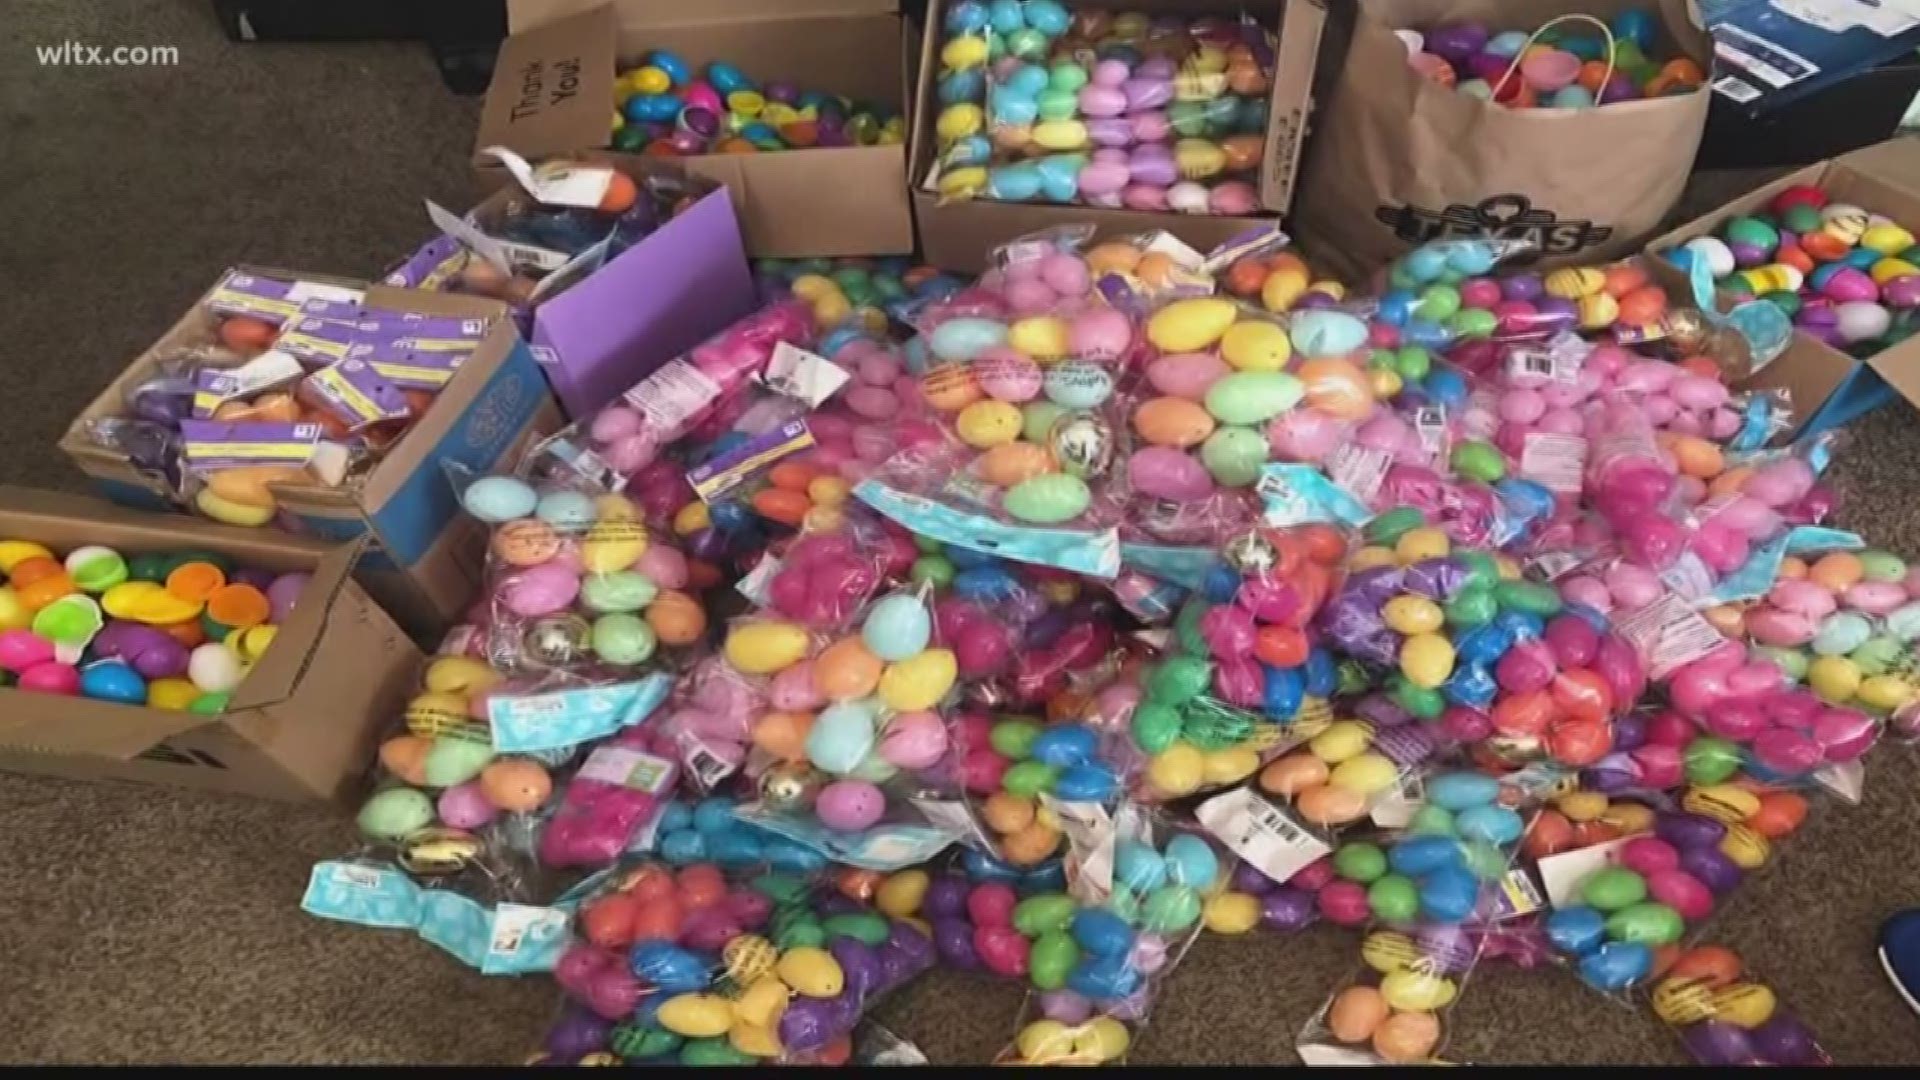 The Irmo community egg hunt will be held on April 6